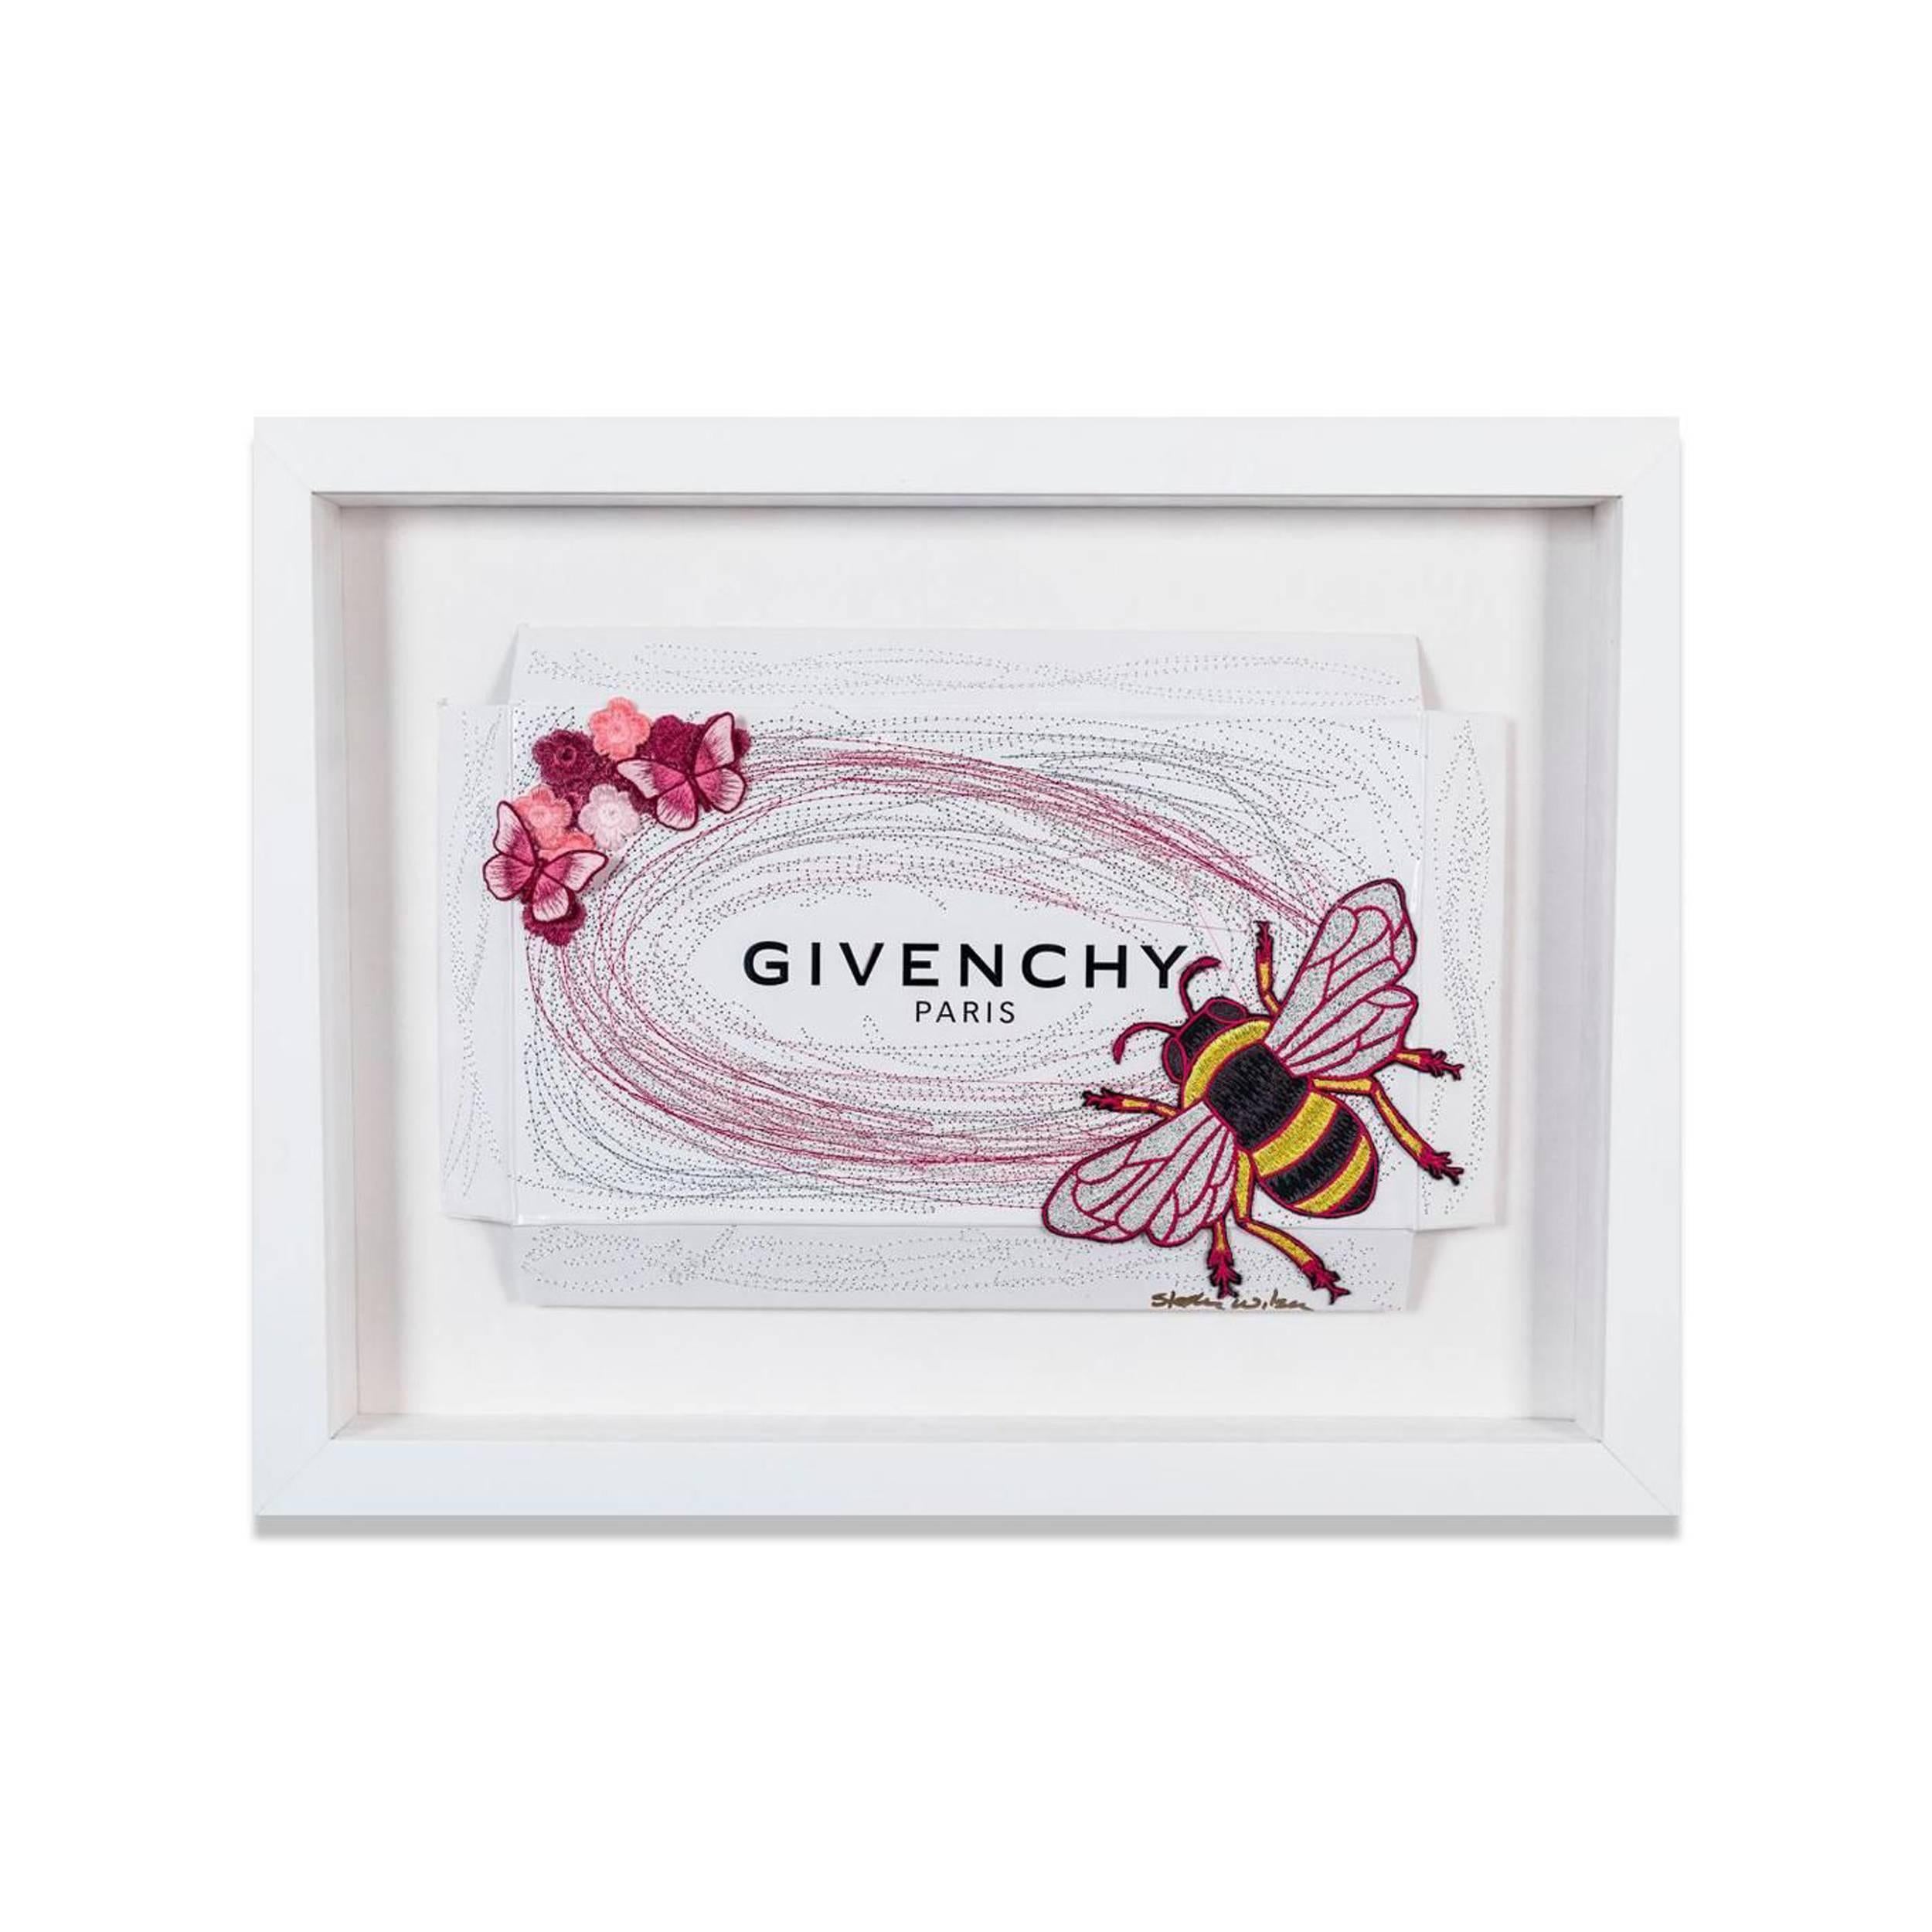 GIVENCHY BUMBLE BEE - Mixed Media Art by Stephen Wilson